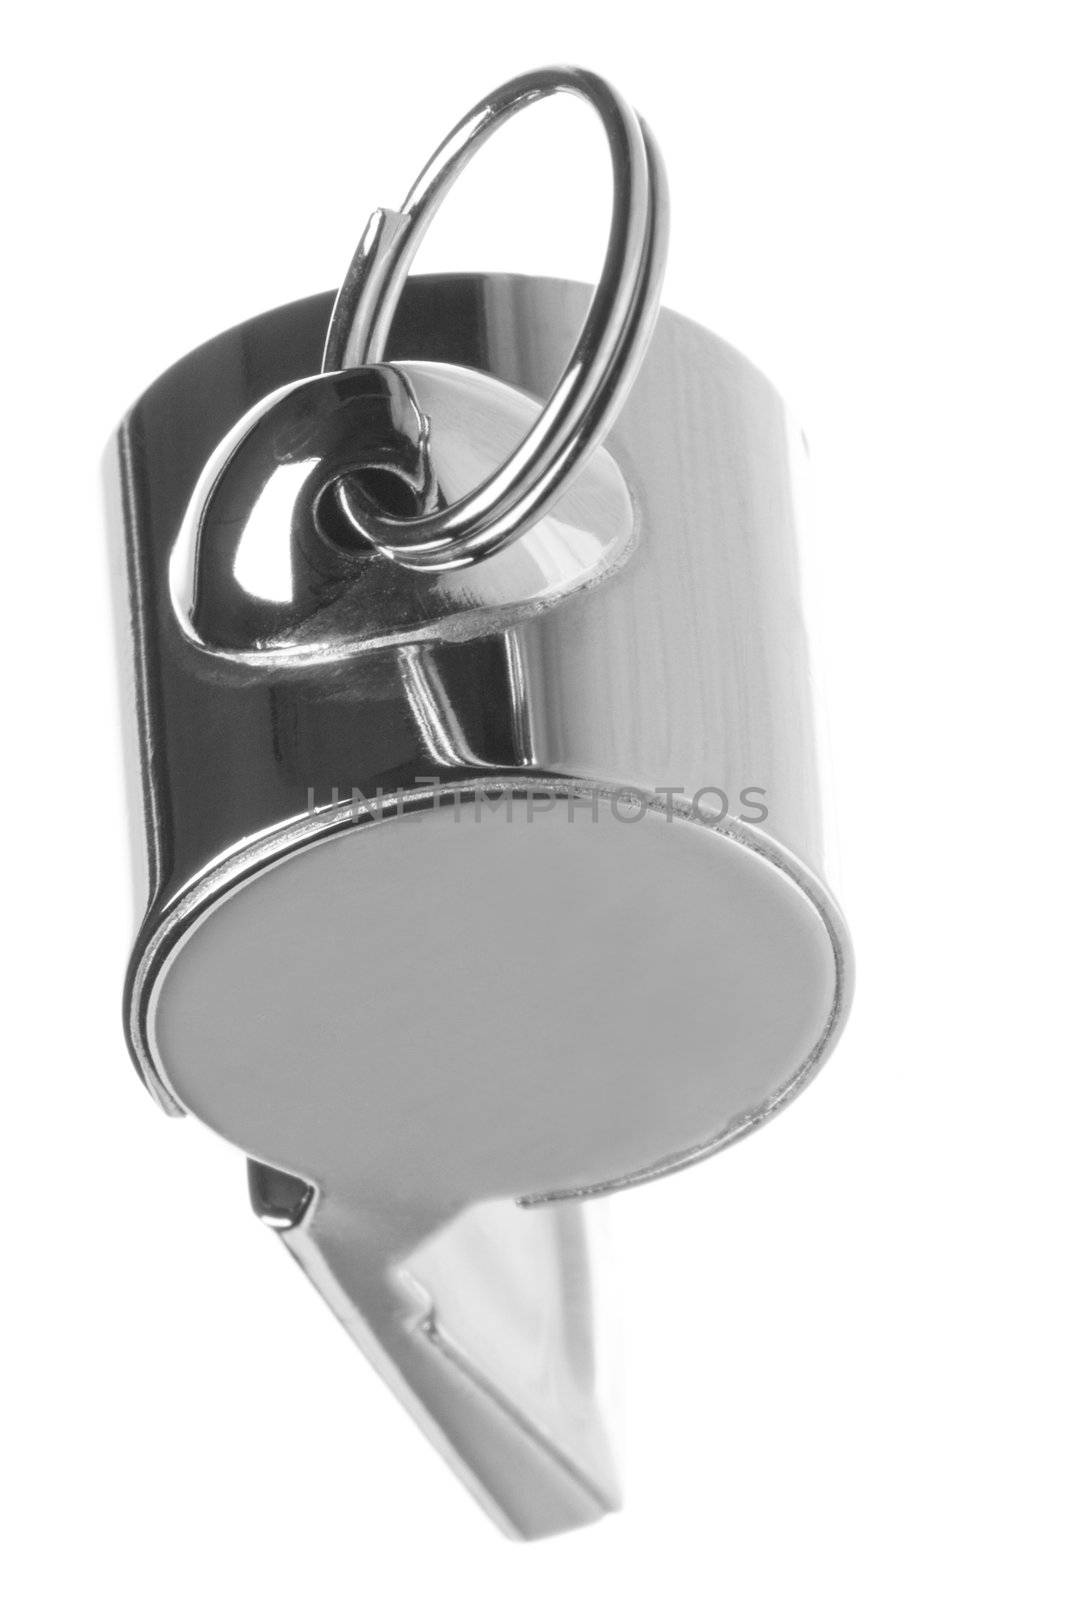 Isolated macro image of a whistle.